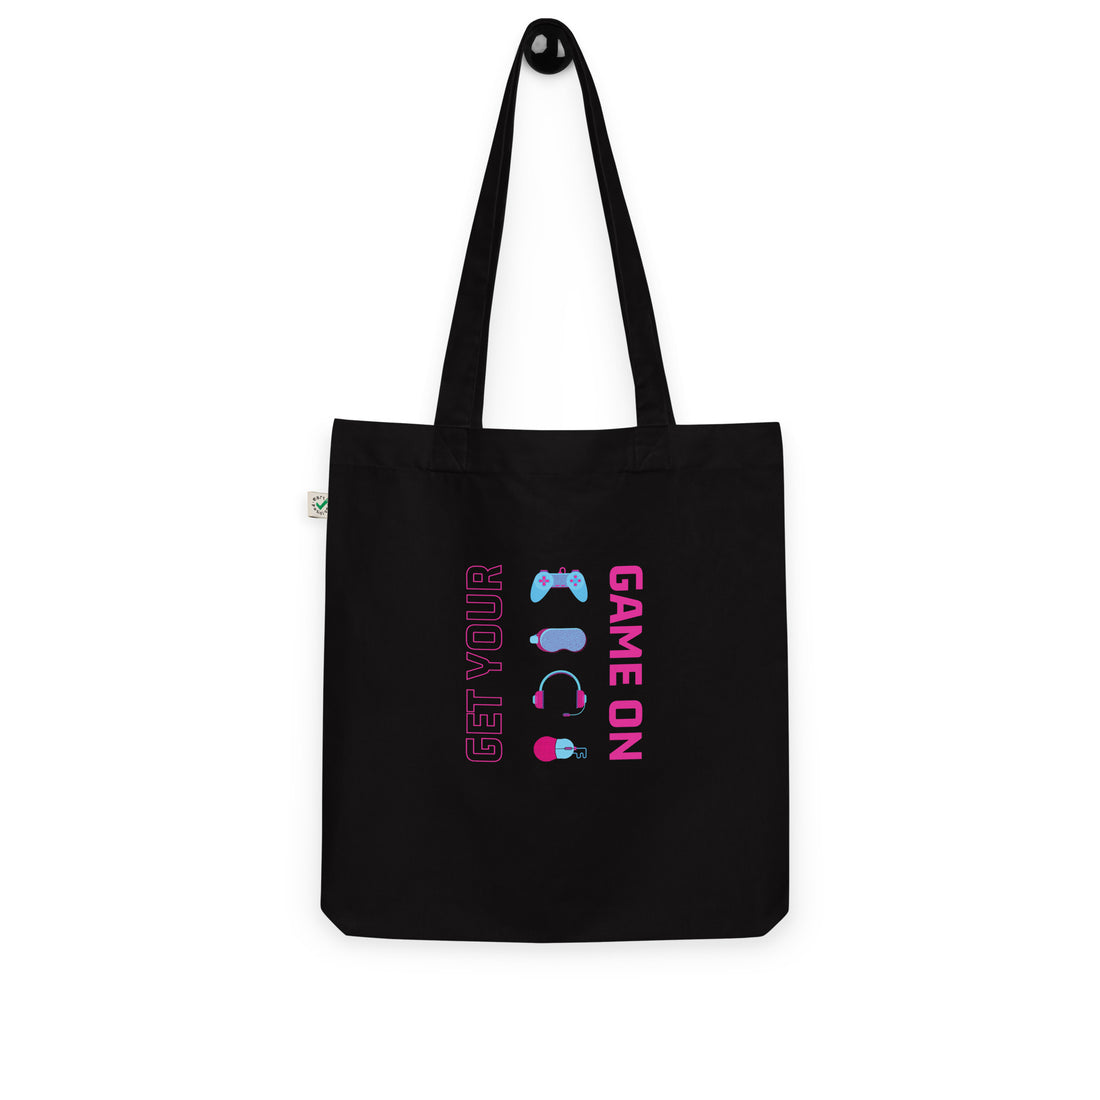 Get Your Game On Tote Bag